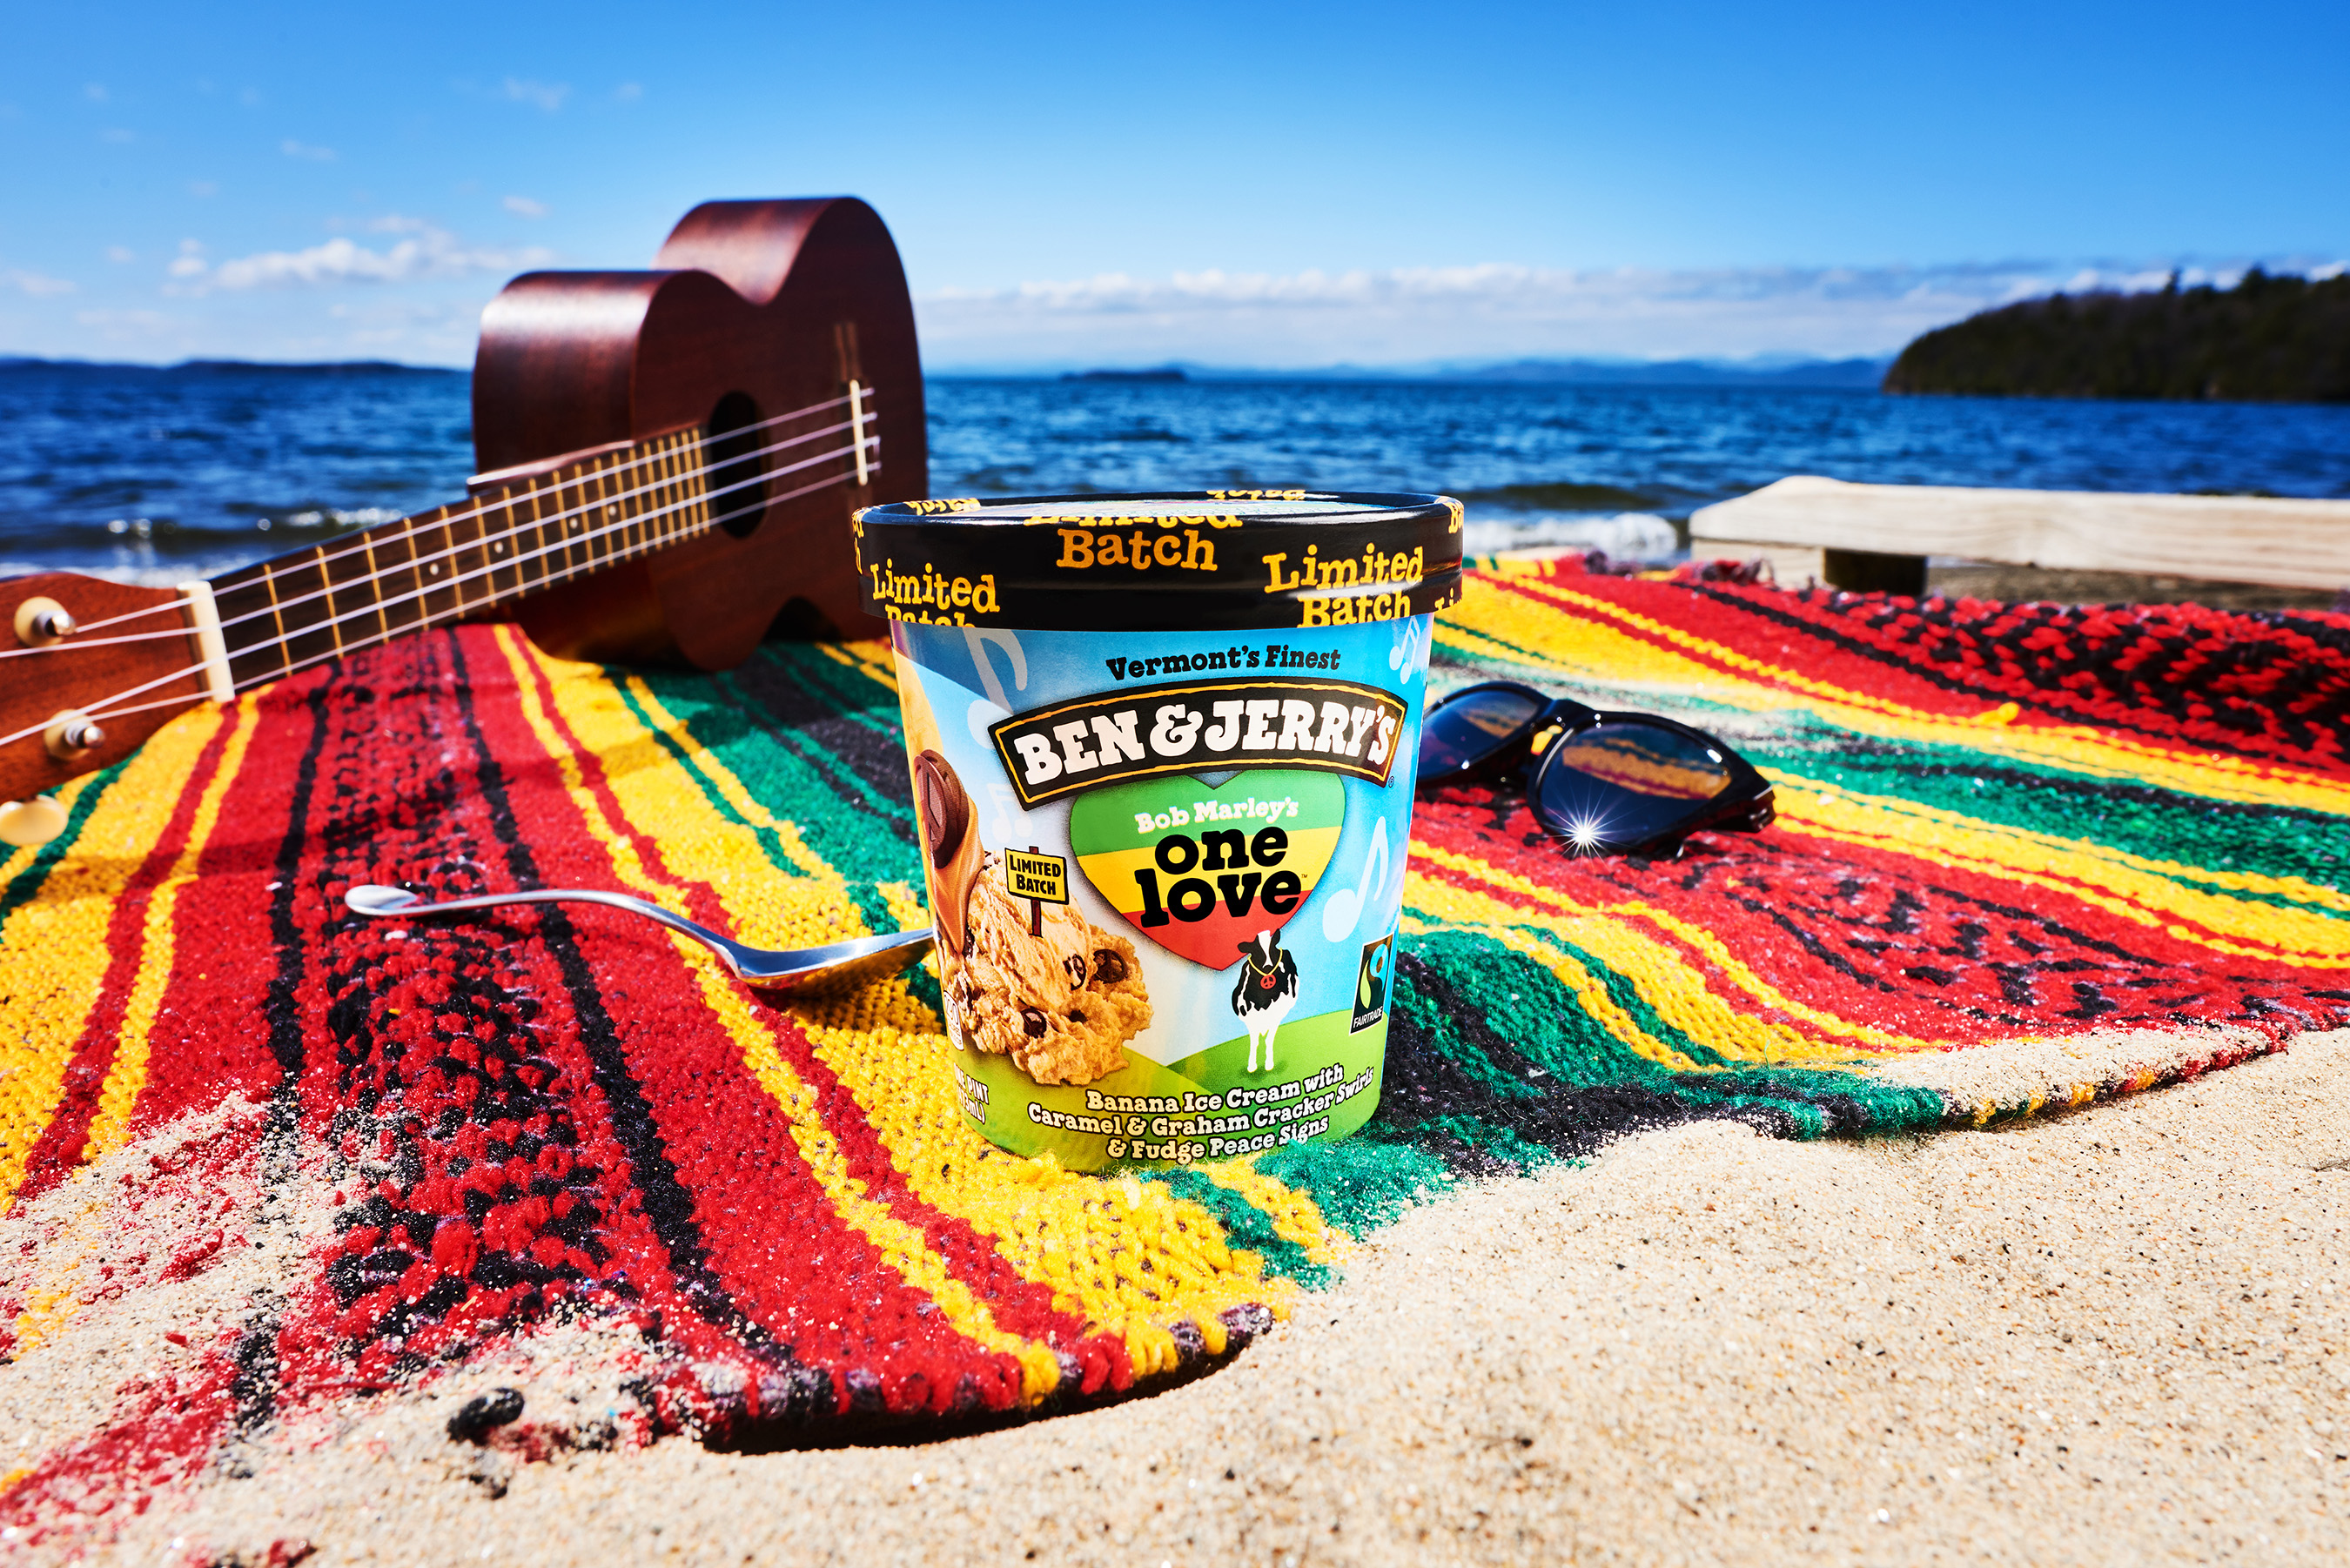 Ben & Jerry's Celebrates Bob Marley's Legacy with New One Love Flavor